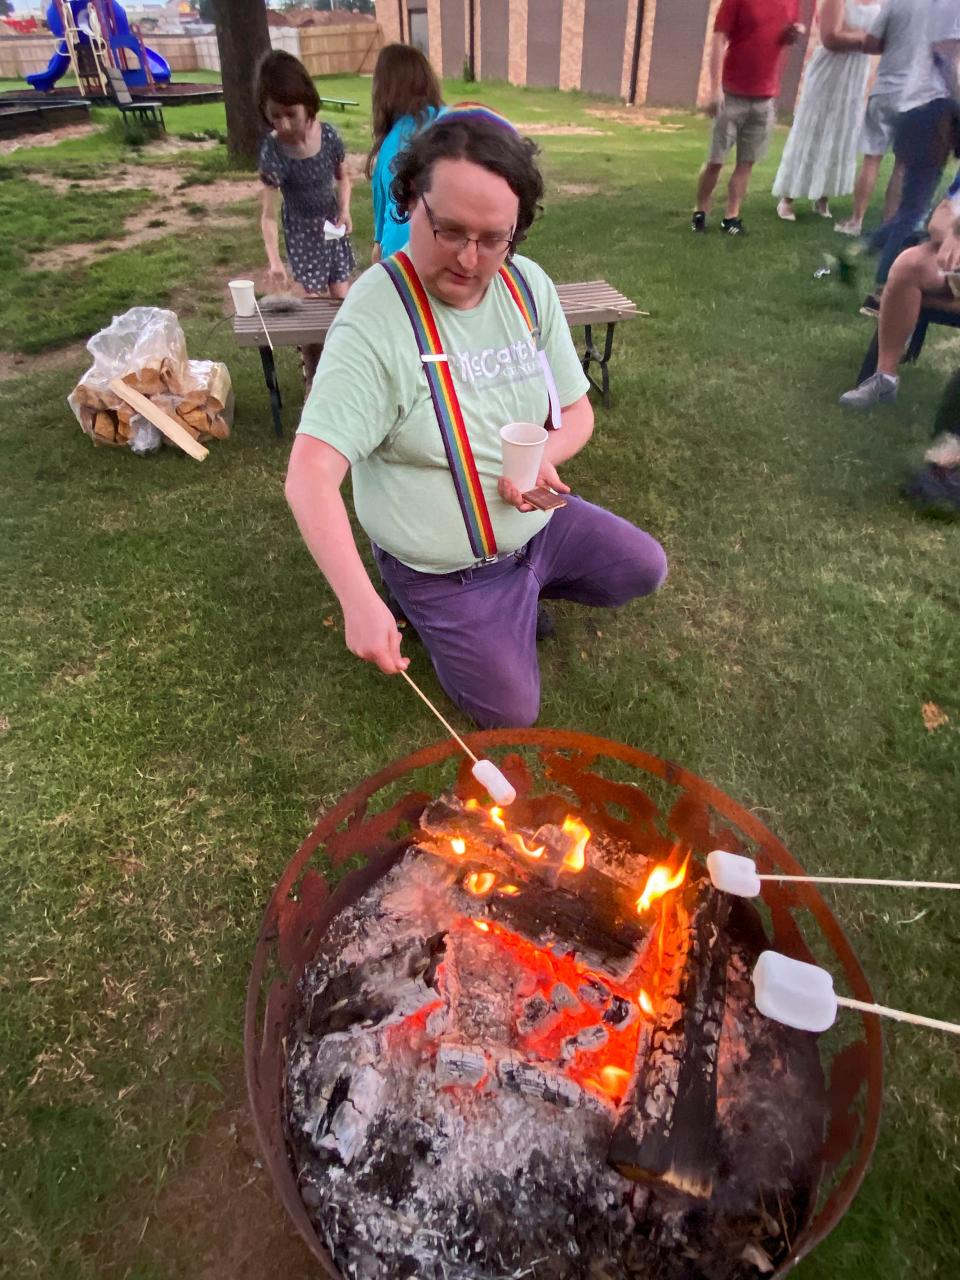 Oswyn Wormley, of Norman, roasts marshmallows for s'mores at the outdoor Shavuot campout at Temple B'nai Israel in Oklahoma City.